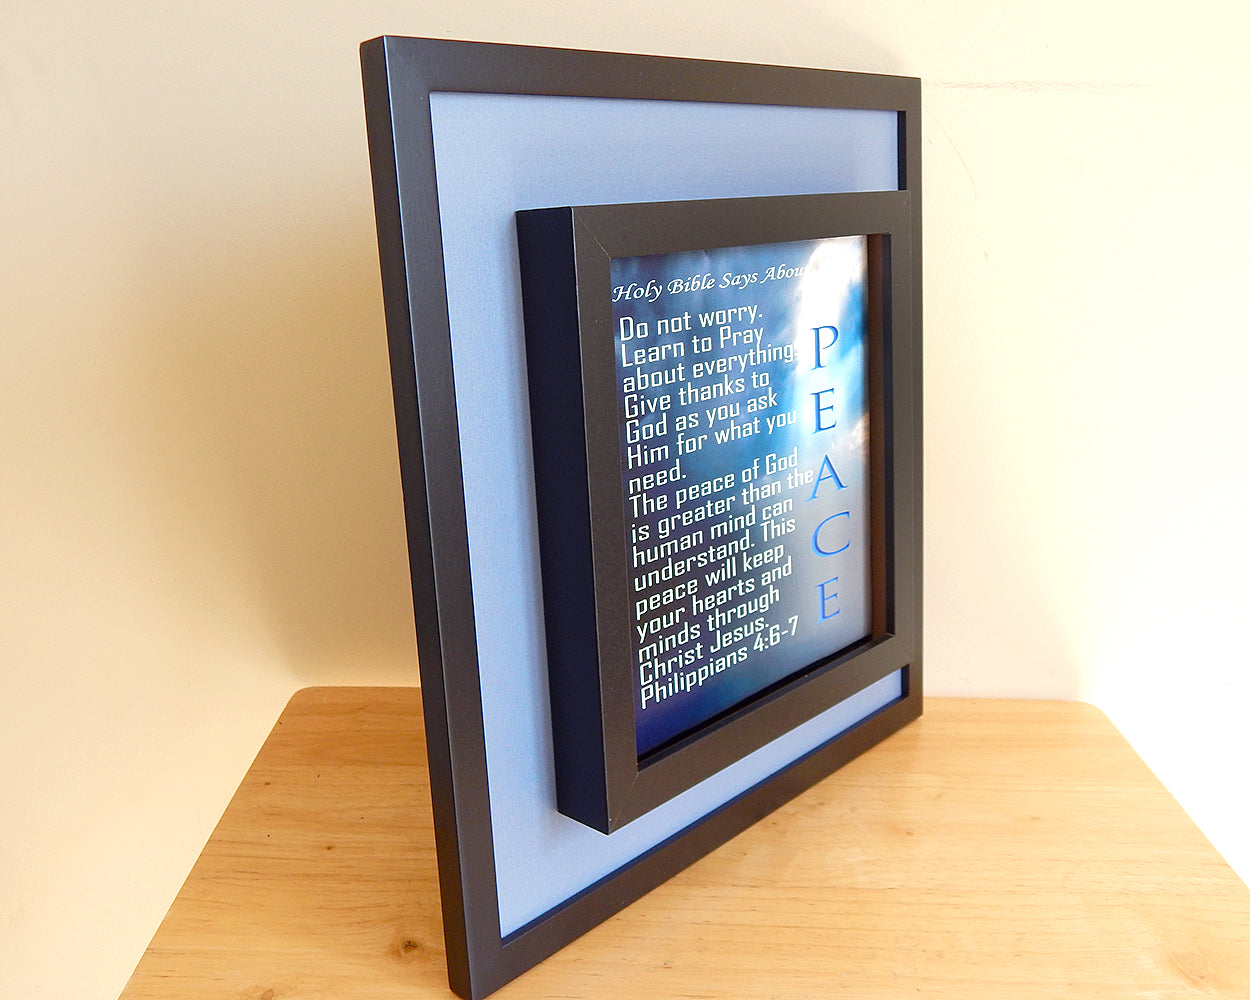 Holy Bible Says About... Series -Peace (Canvas Print in unglass frame) Free Shipping